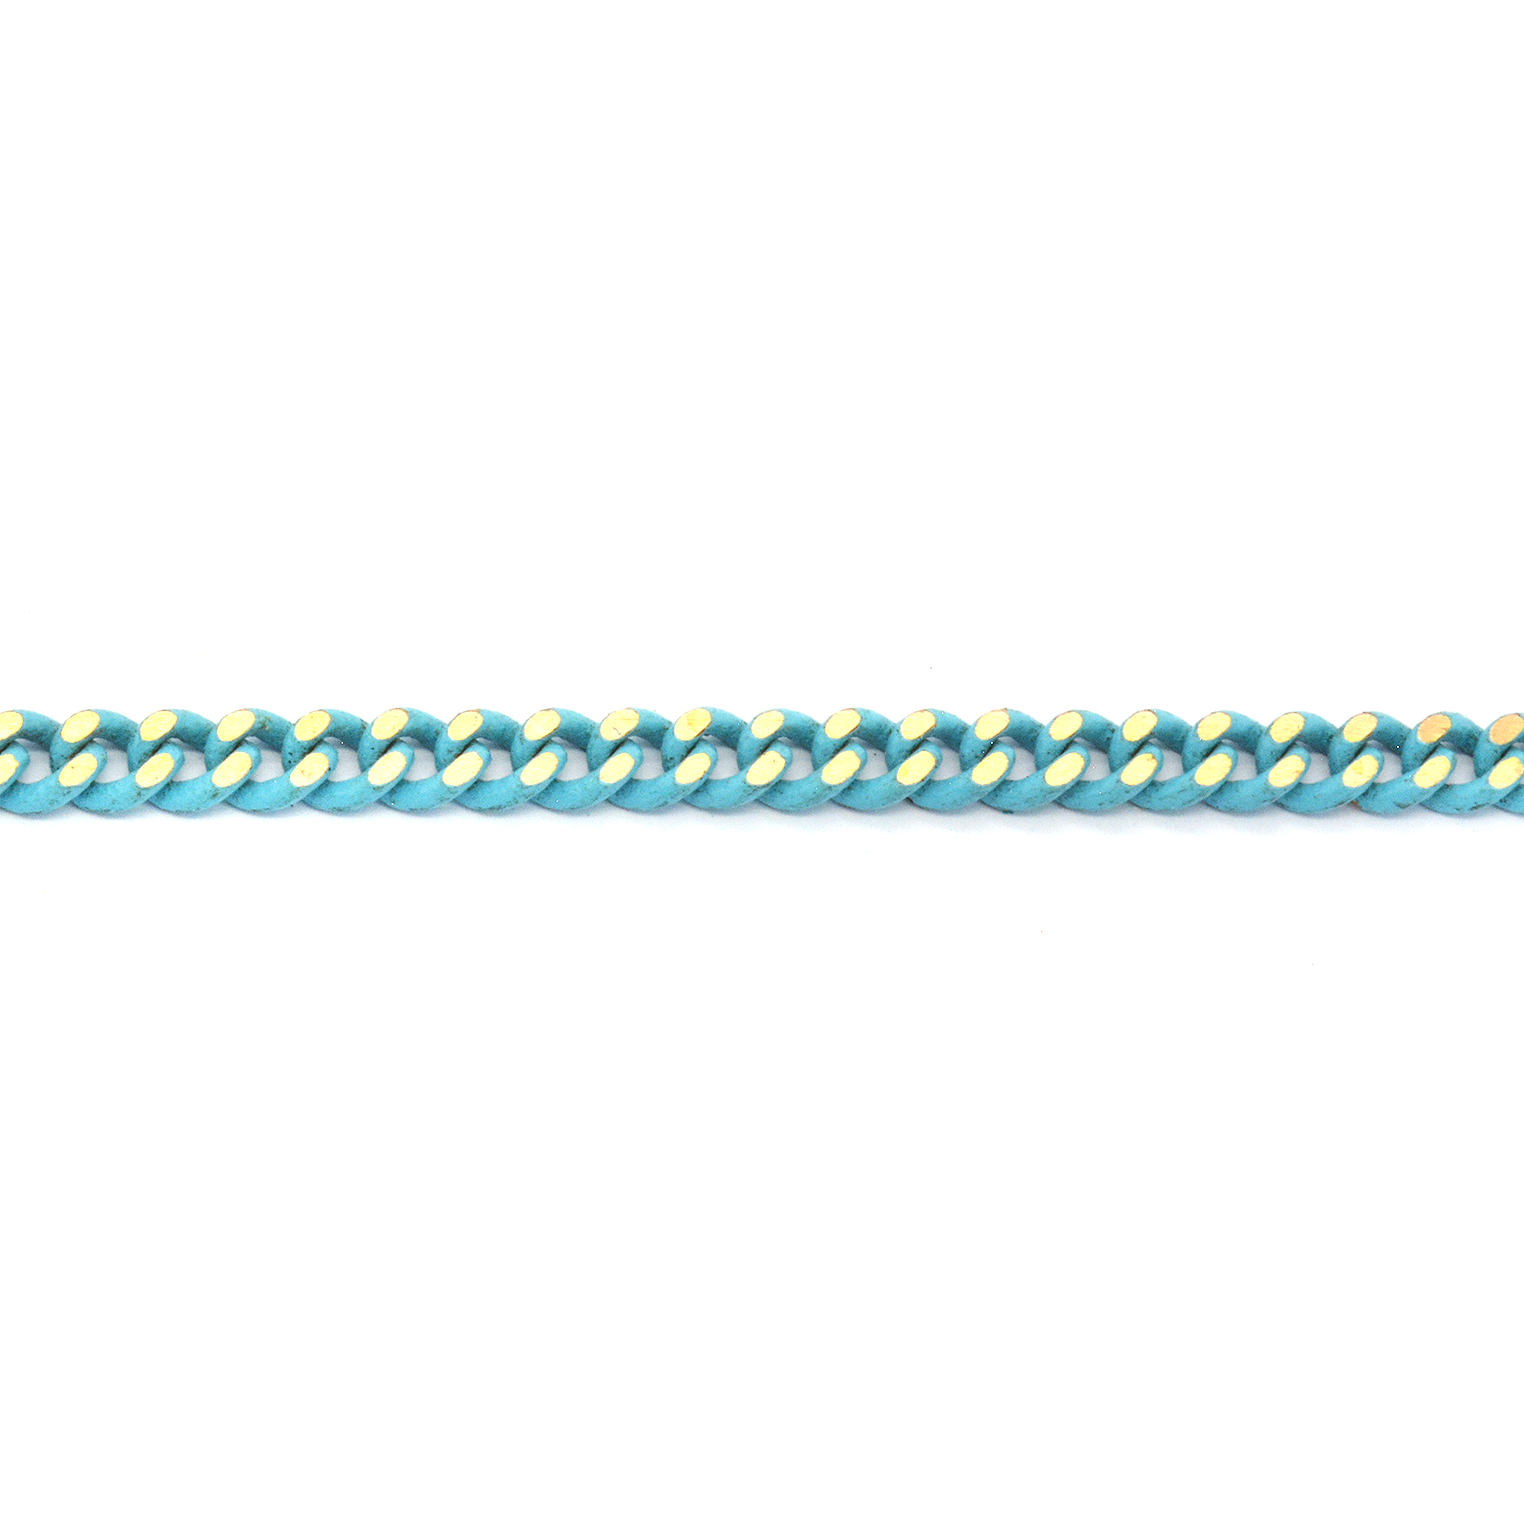 Polished turquoise enamel stainless steel curb (gourmette) chain 3.85mm